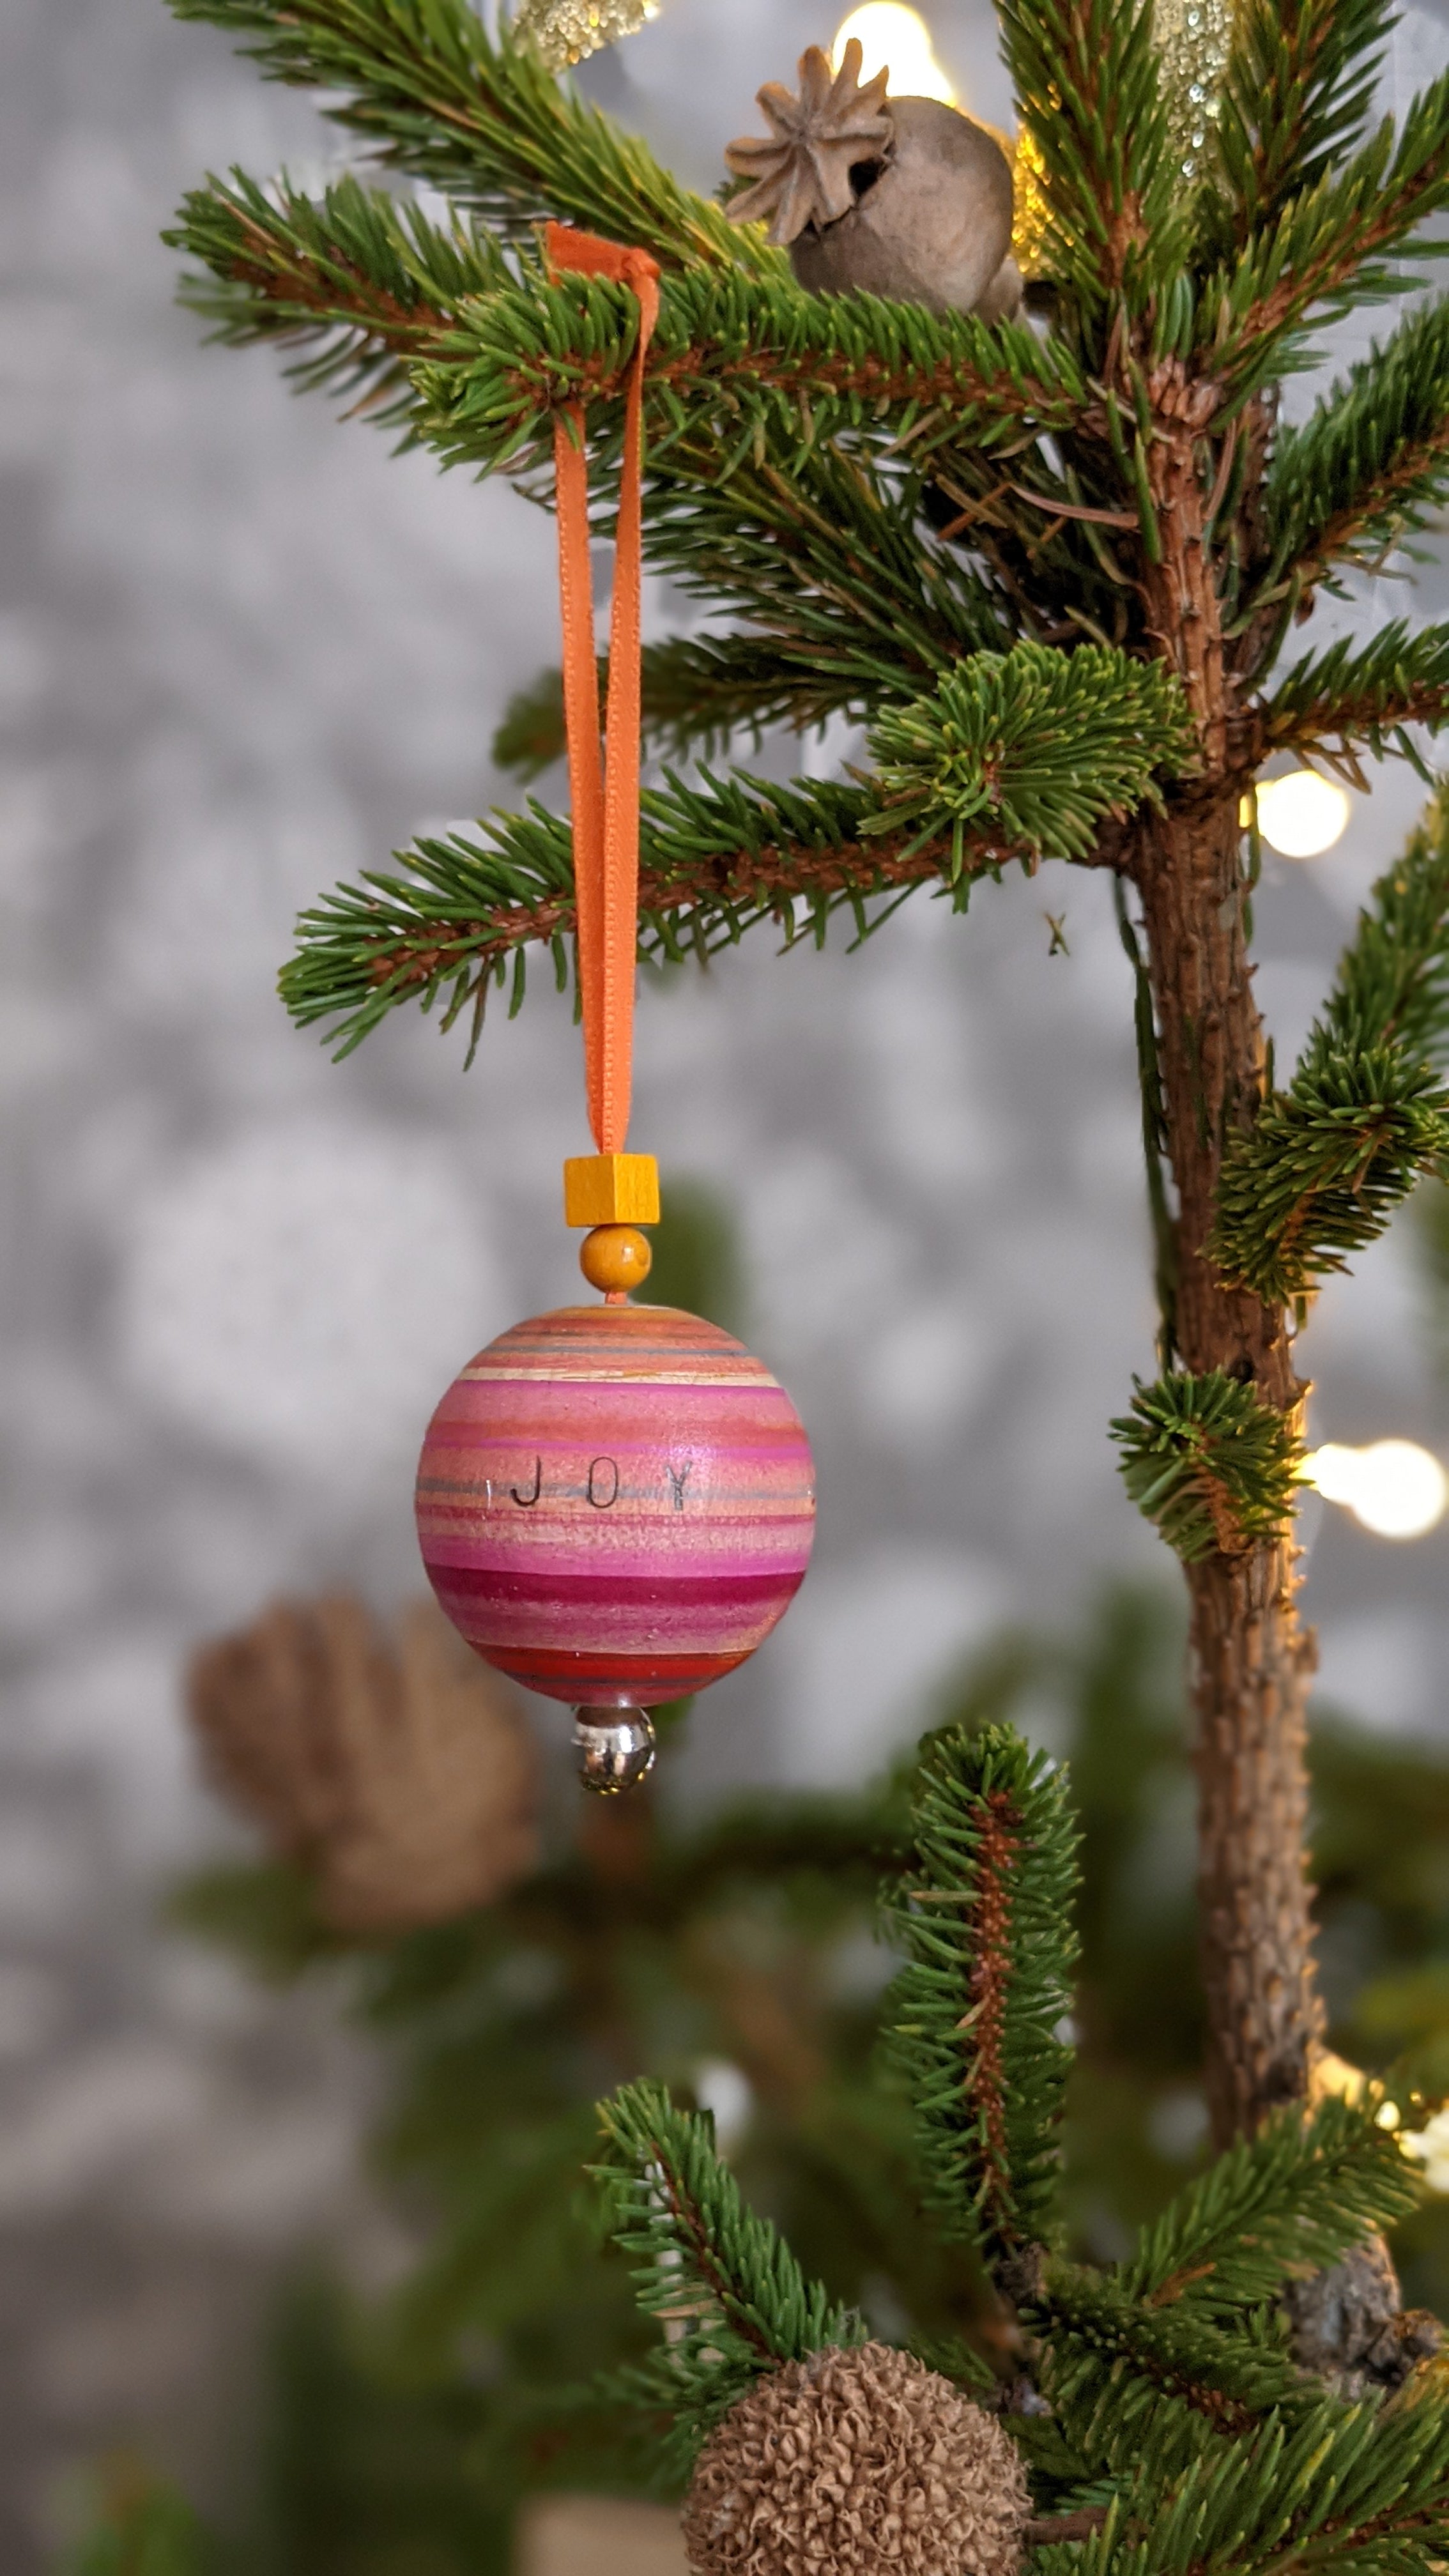 Sarah Lock wood turned and hand painted bauble